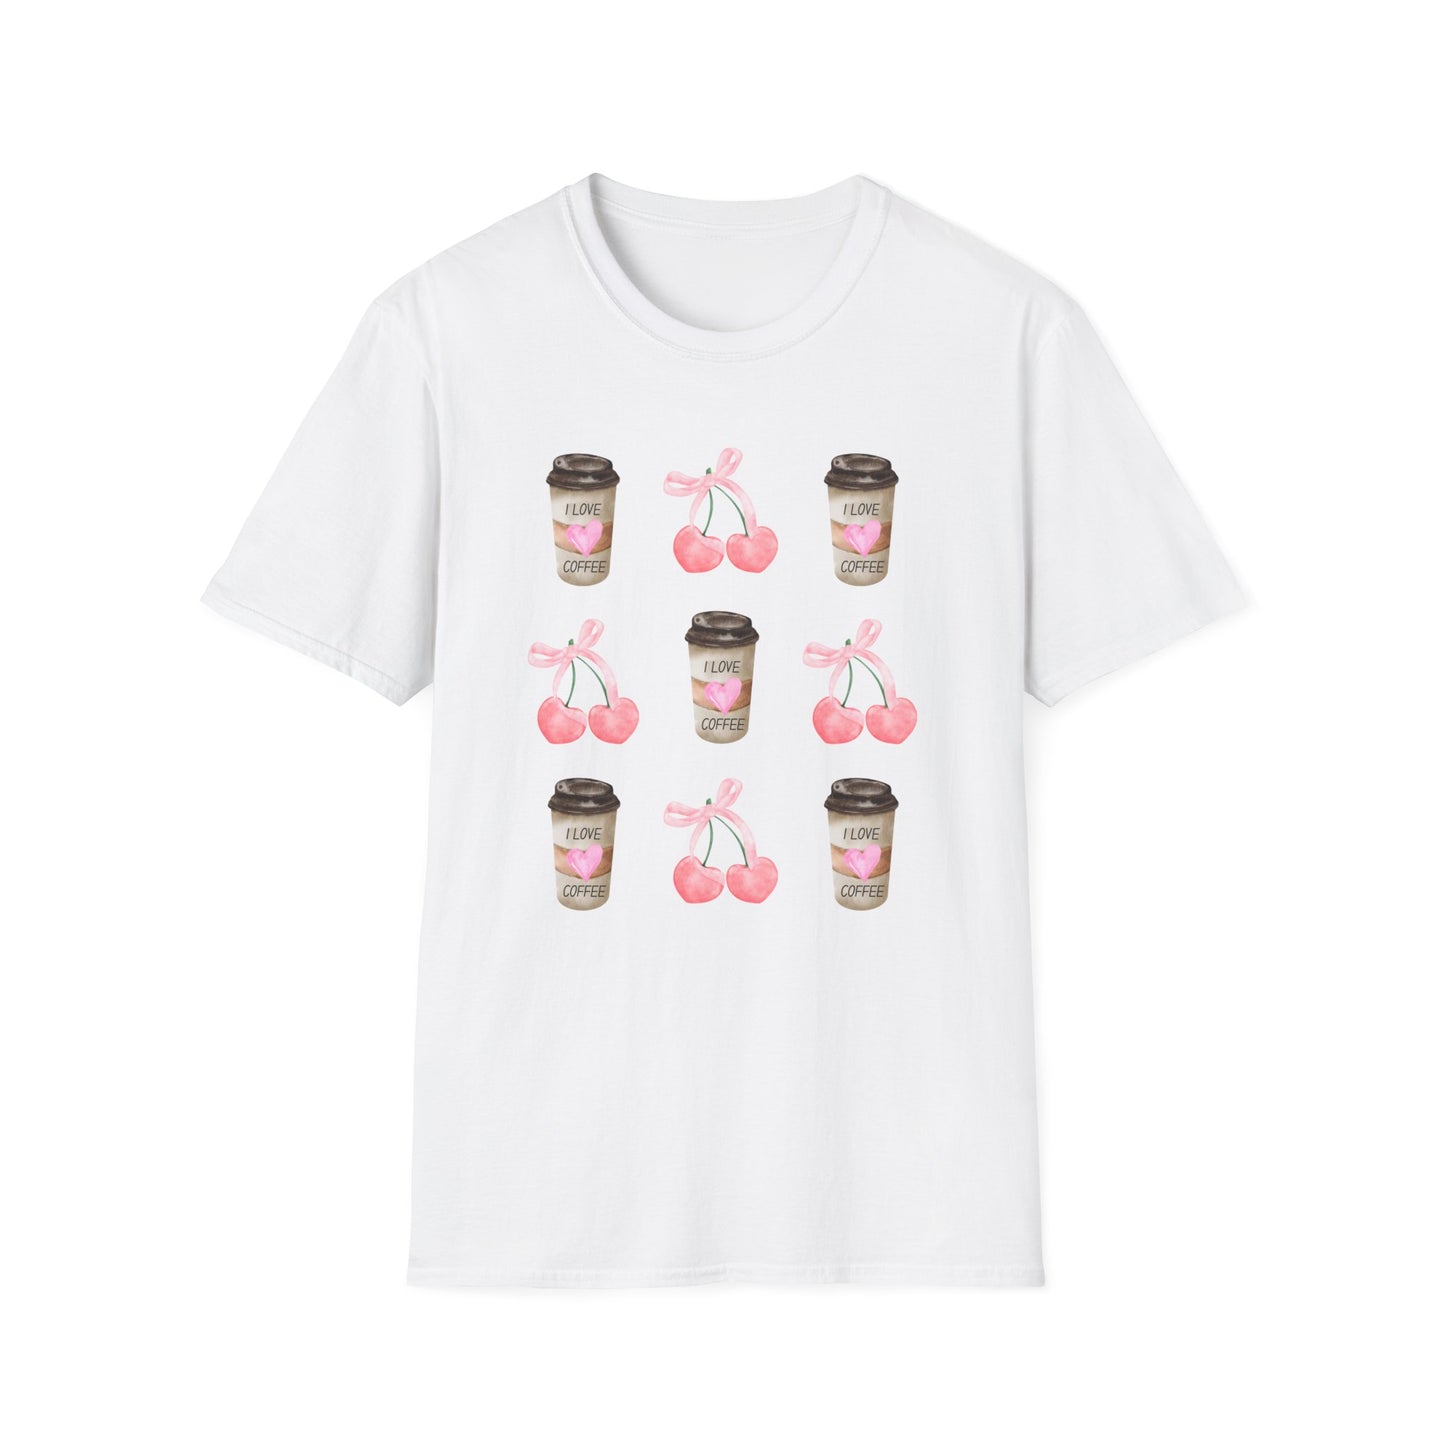 I Love Coffee - Pink Watercolor Coquette Girly Designs - Unisex Softstyle T-Shirt